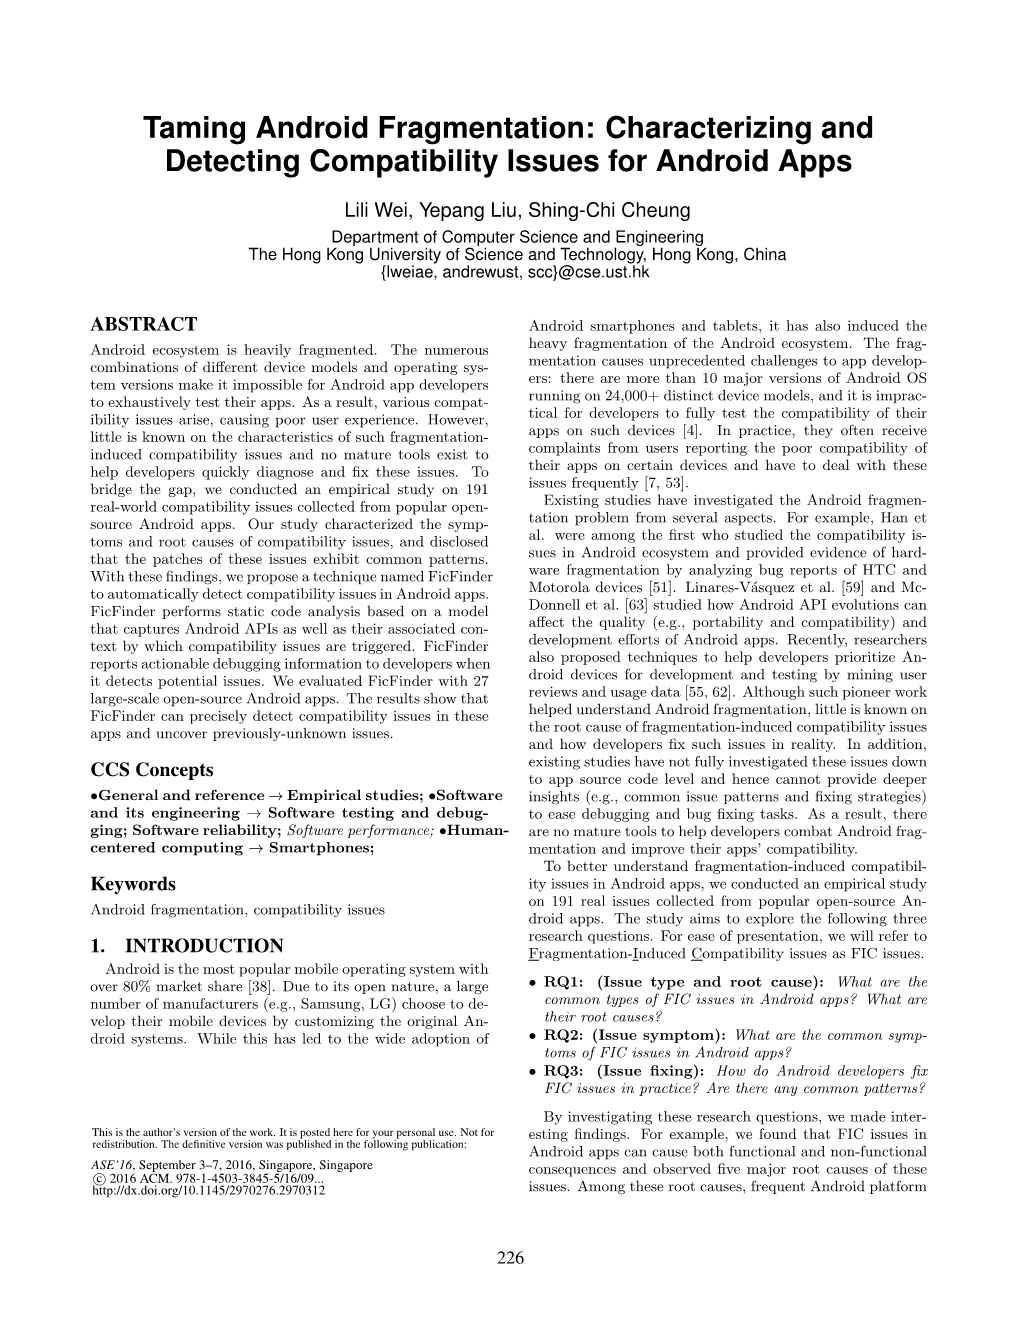 Characterizing and Detecting Compatibility Issues for Android Apps